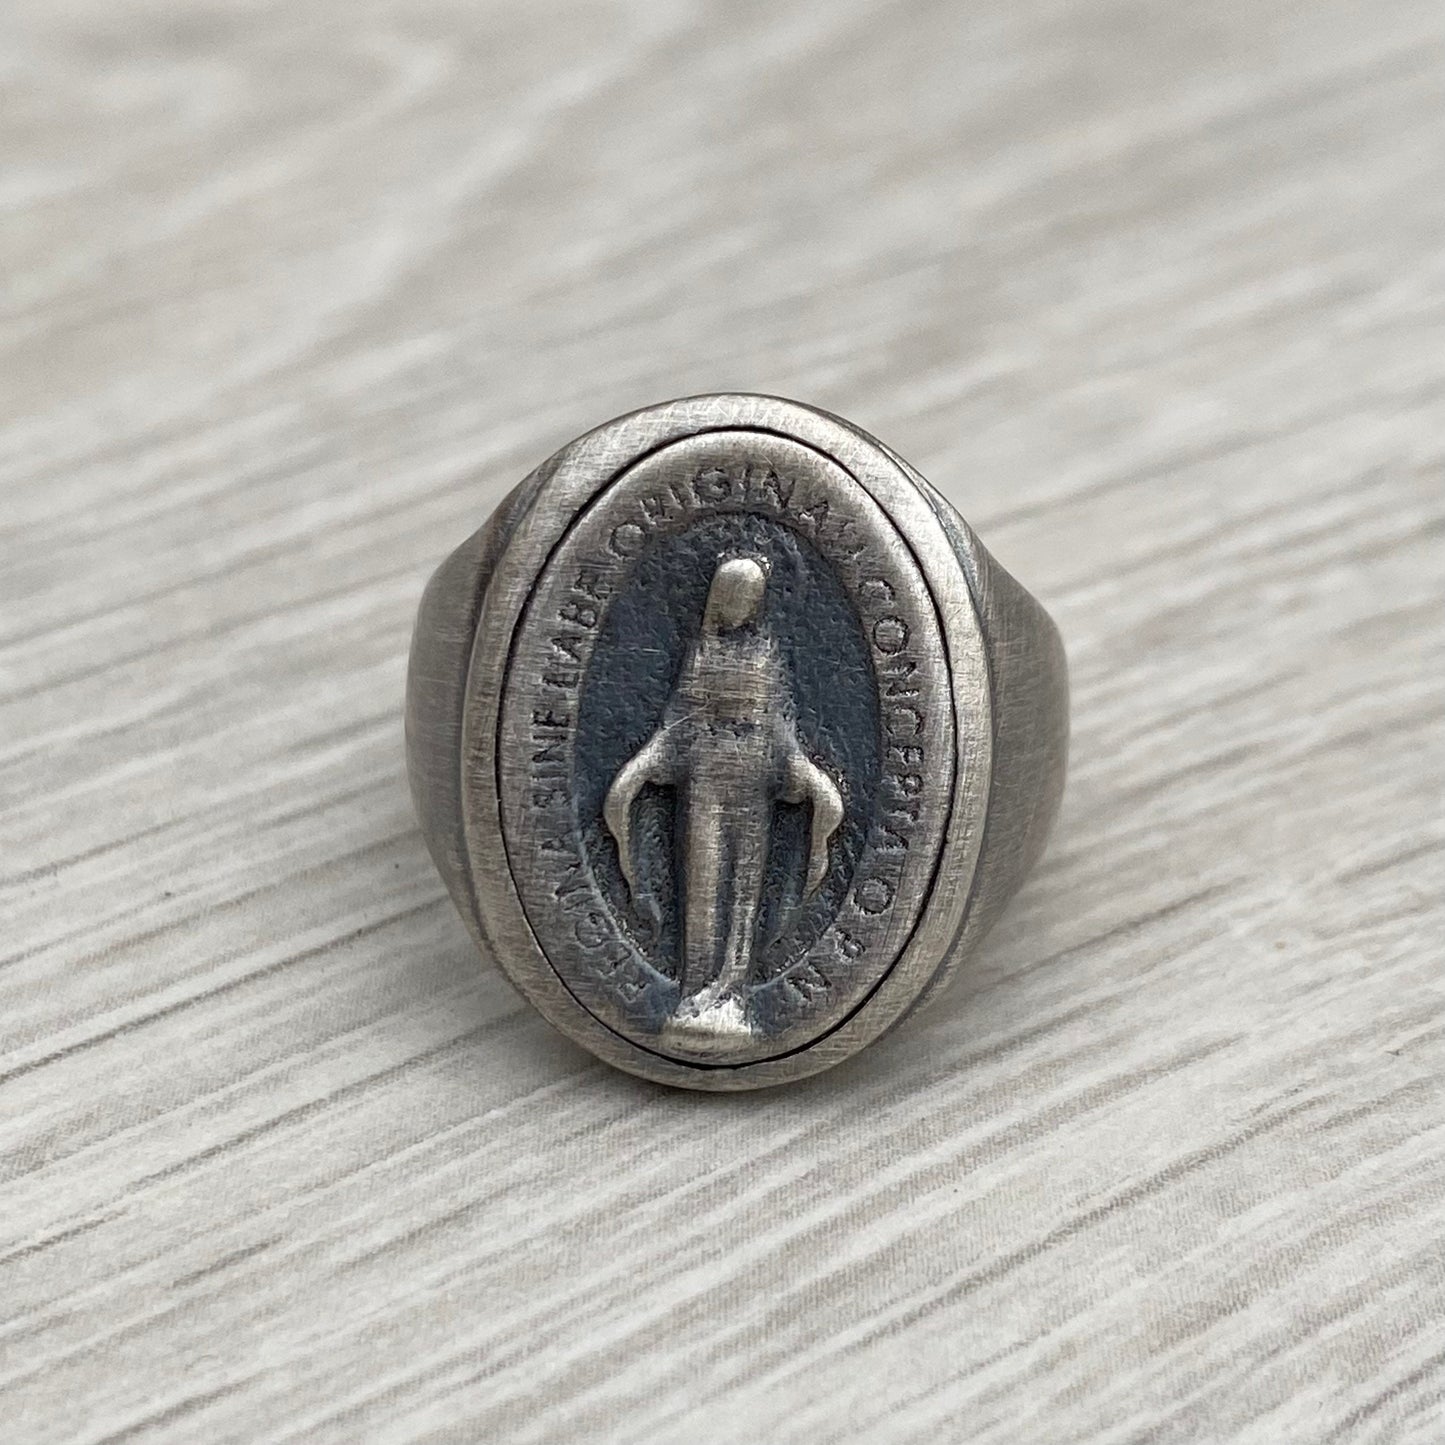 Large oxidised silver miraculous medal ring - Statement Madonna ring - Oxidised silver - UK size M - US size 6 1/4 - Pre-loved jewellery